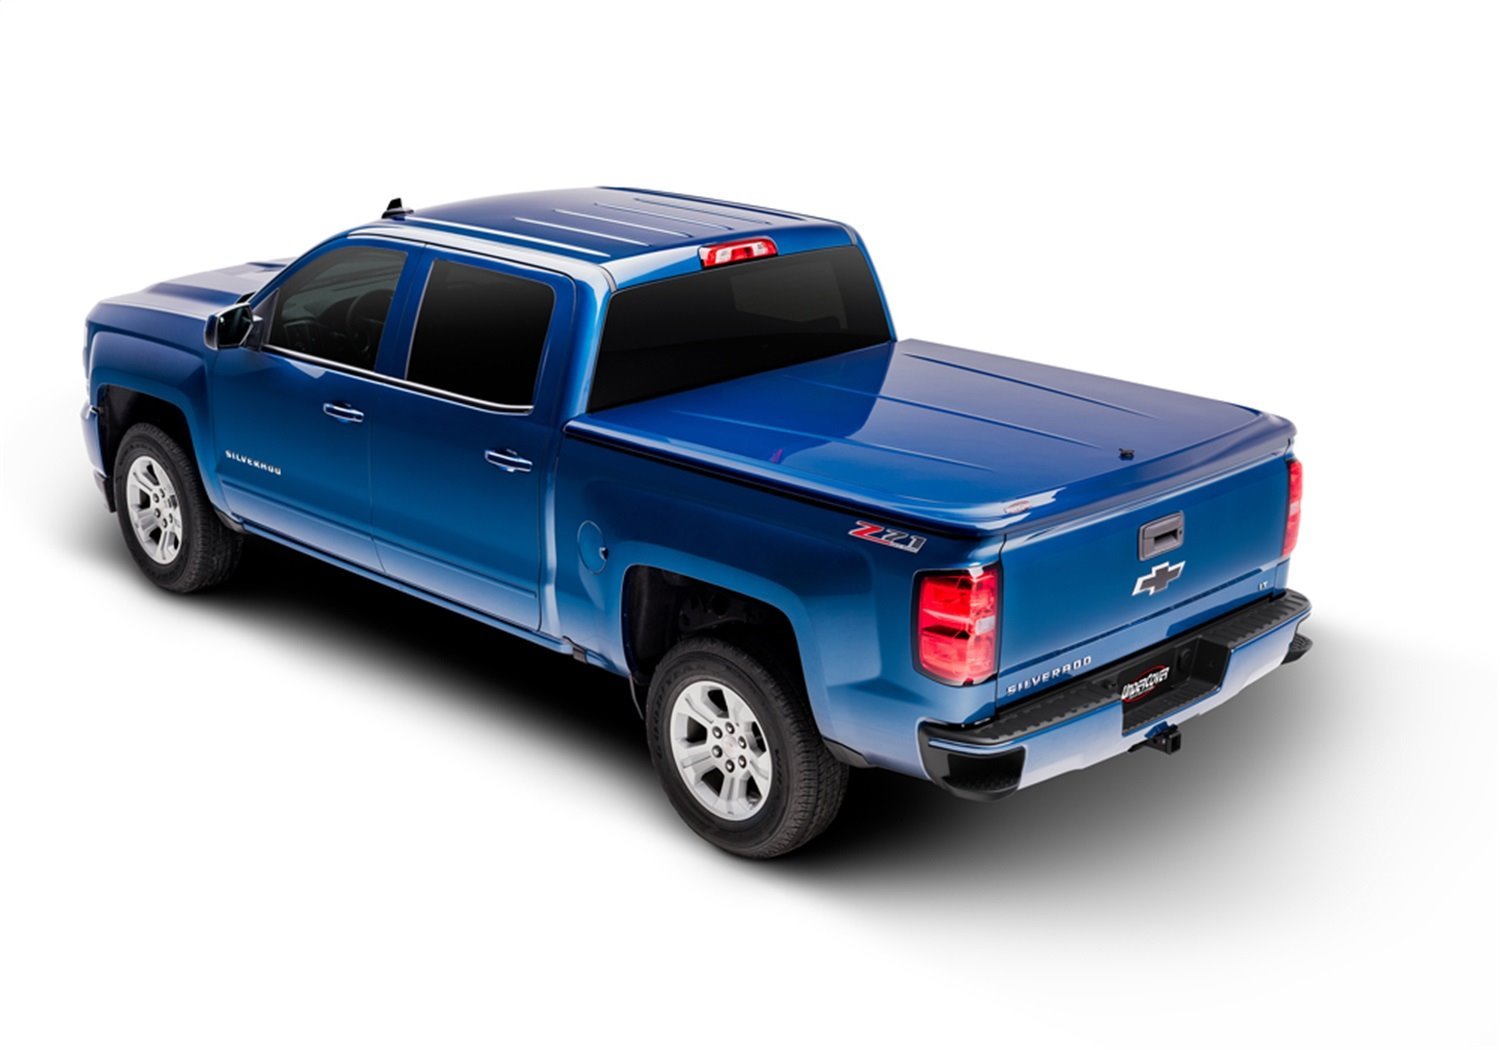 UC3076L-PW7 LUX Hard Non-Folding Cover, 2009-2018 (Select Classic) Ram 1500/2500/3500 6'4" Bed, w/o RamBox, PW7 Bright White